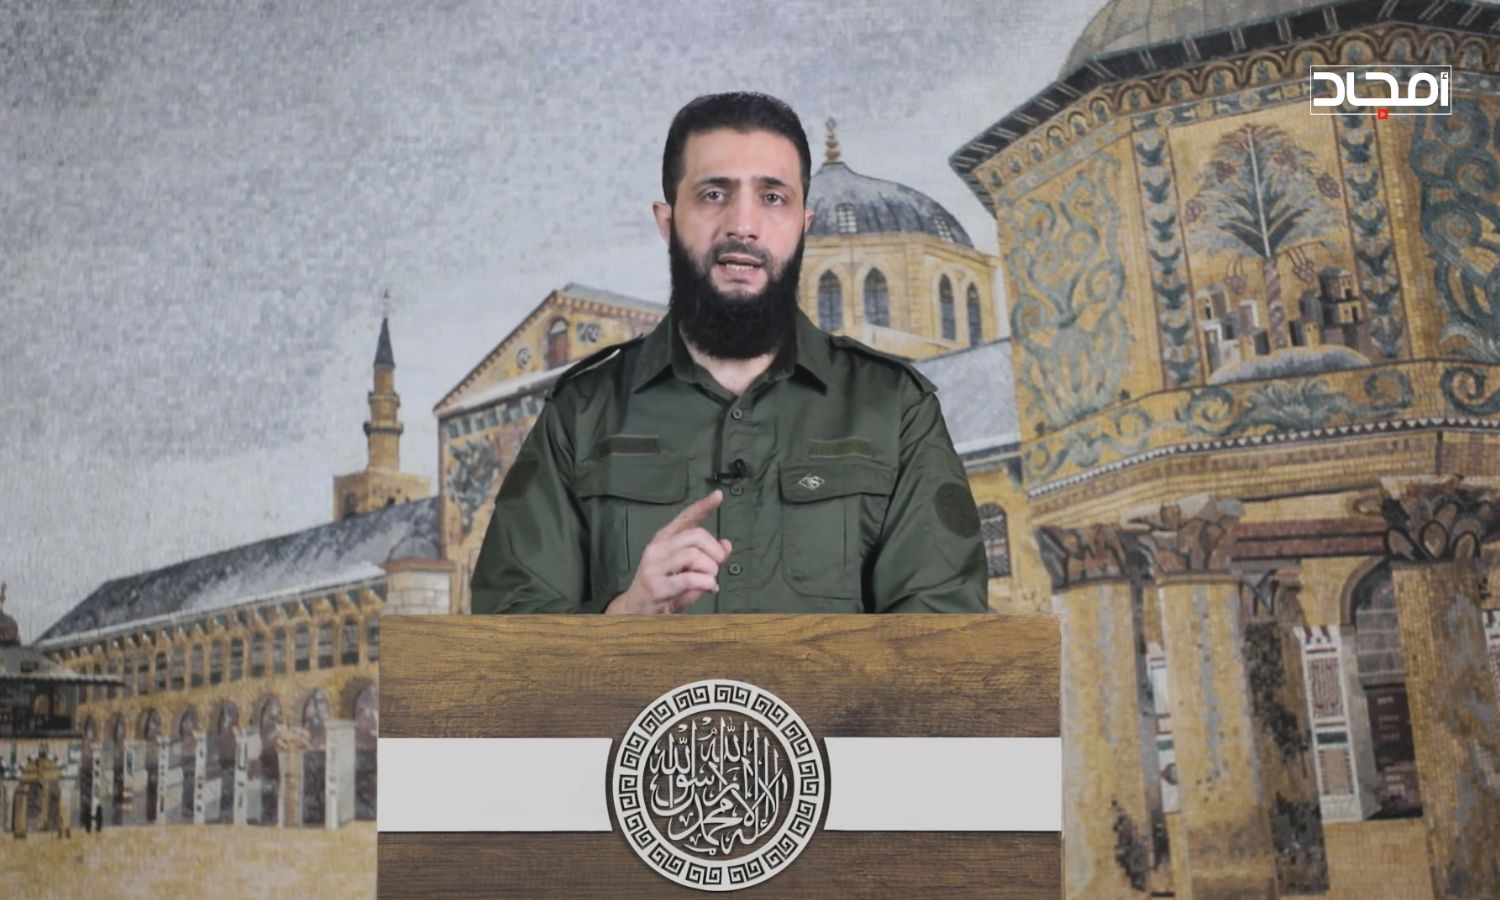 Abu Mohammad al-Jolani, HTS commander, in a recording speech entitled “We will not reconcile” - January 2, 2023 (Amjad media)